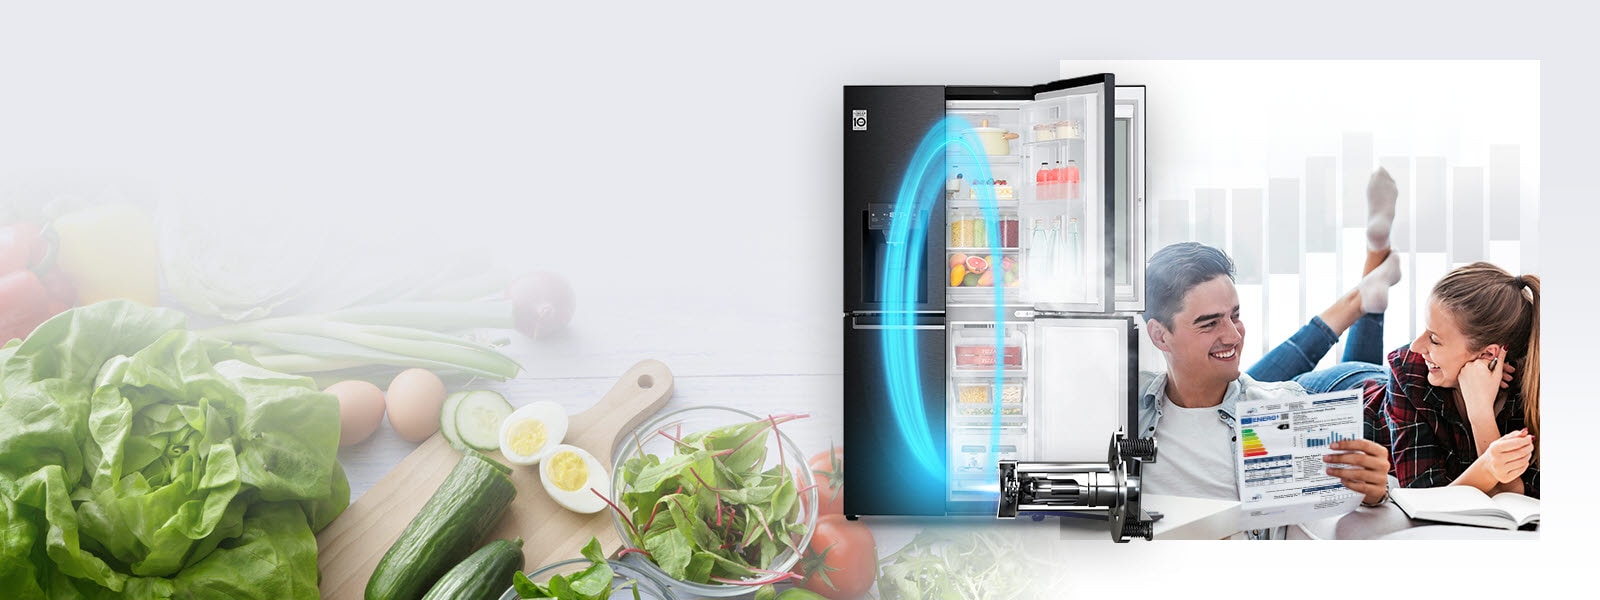 An LG refrigerator with one side of doors open displaying produce and drinks inside is in the background along with a magnified image of fresh produce. Just in front of it is the LG Inverter Linear Compressor with a blue neon oval showing the energy from the machine in the refrigerator. Also in the image is a man and woman smiling at each other as the man holds an energy usage chart for the refrigerator.